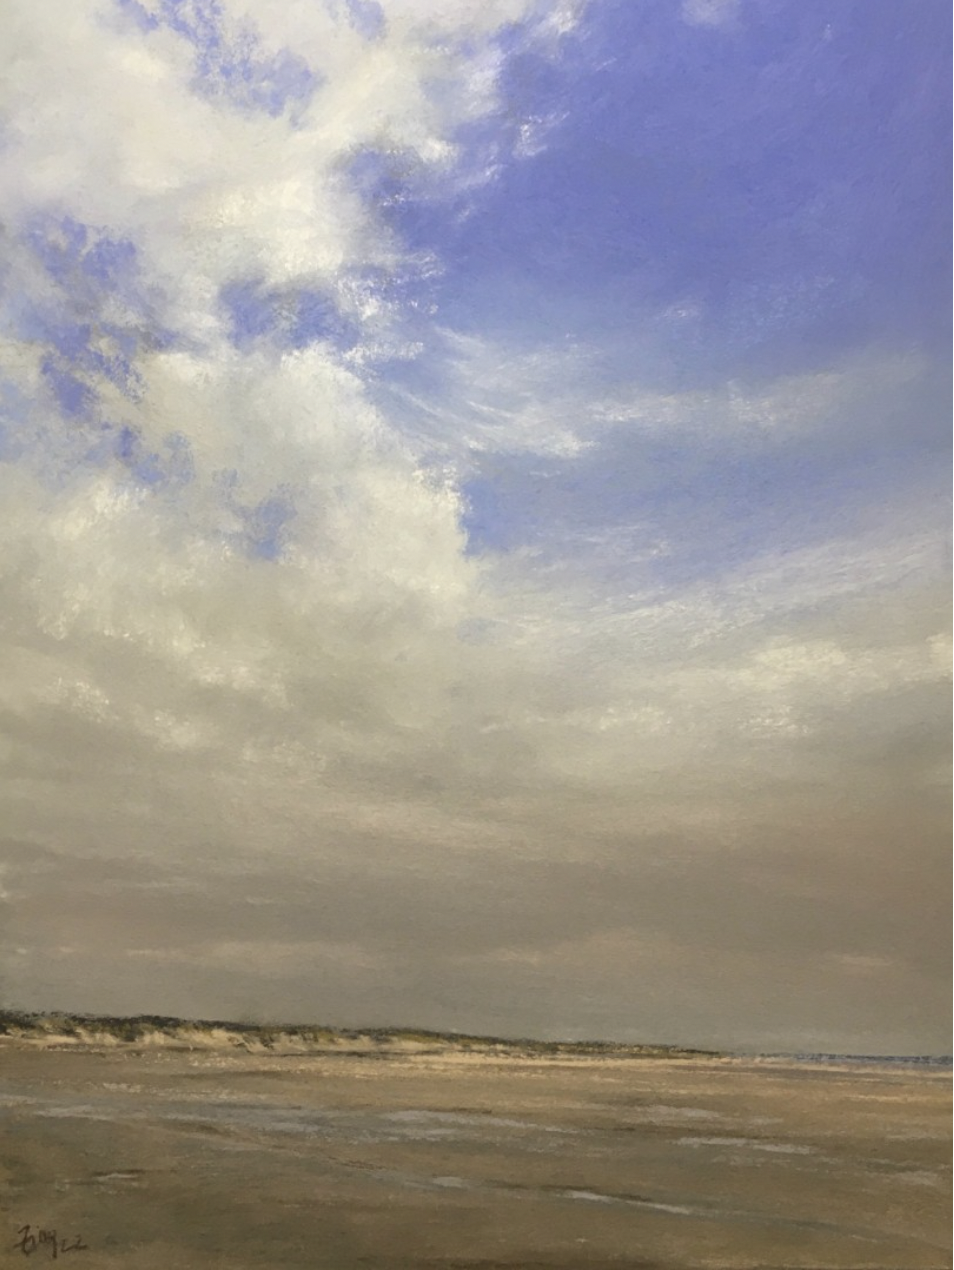 Martina Zingler, "Just a Beautiful Sky," pastel, 16 x 12 in. August 2022 Clouds and Sky Honourable Mention.